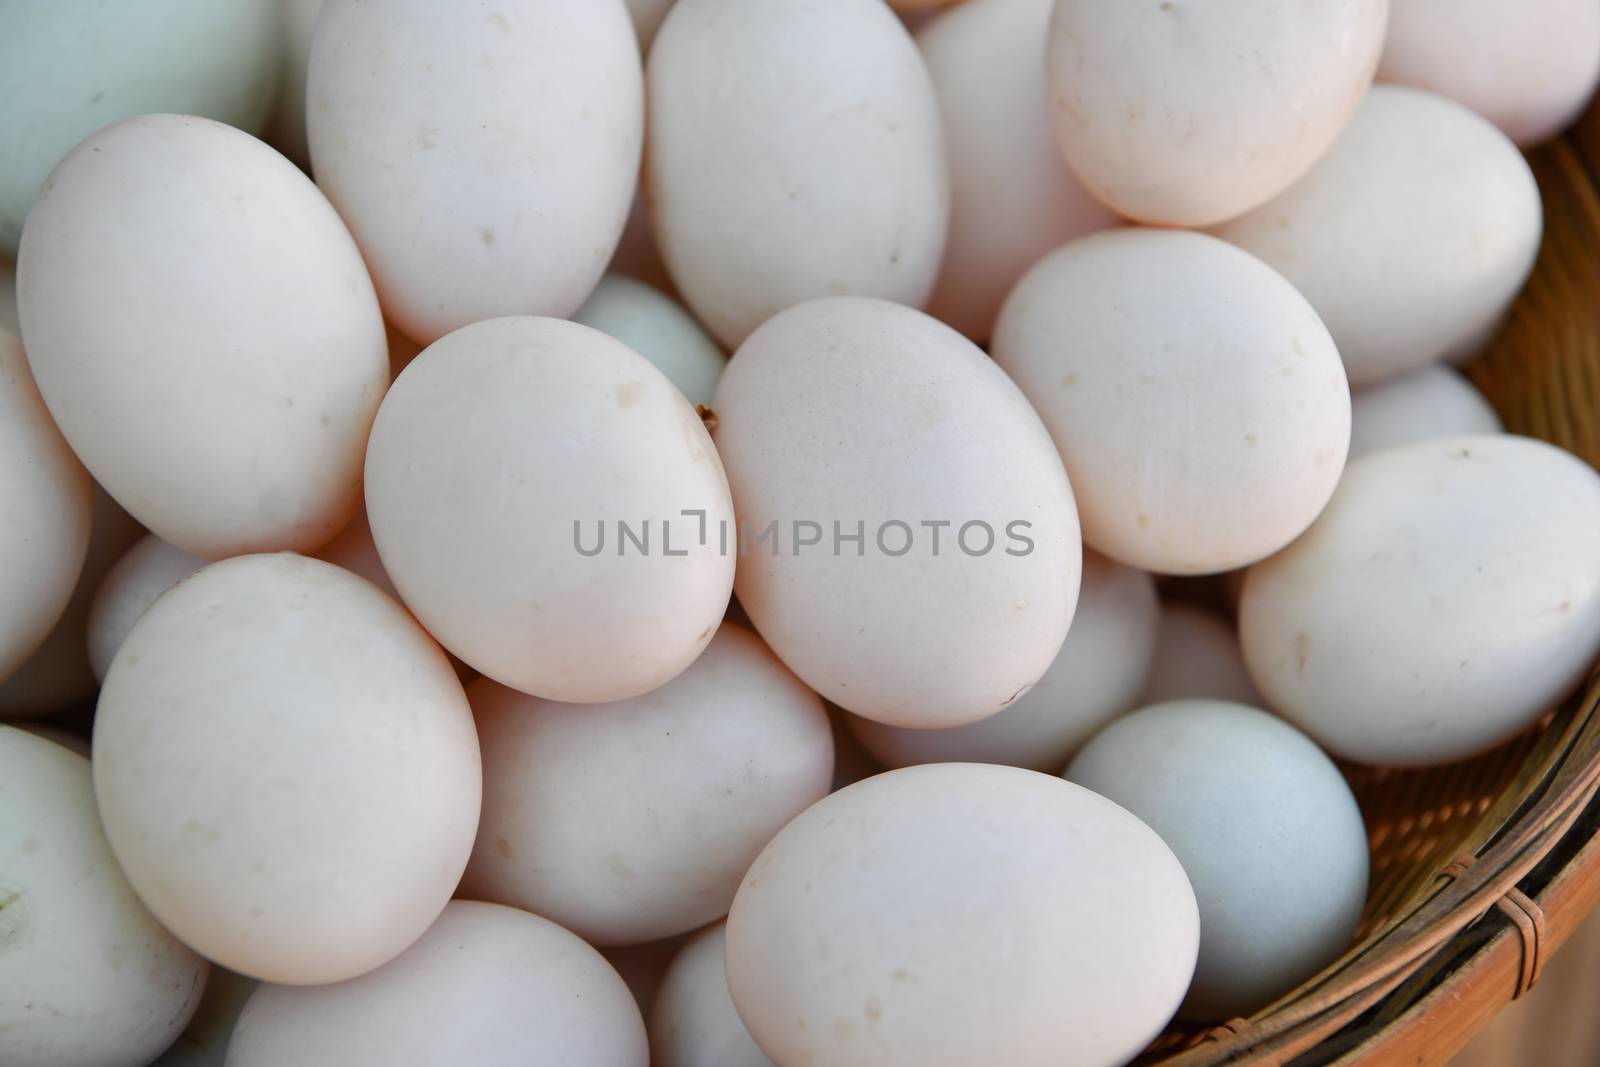 Eggs of duck in basket at market.